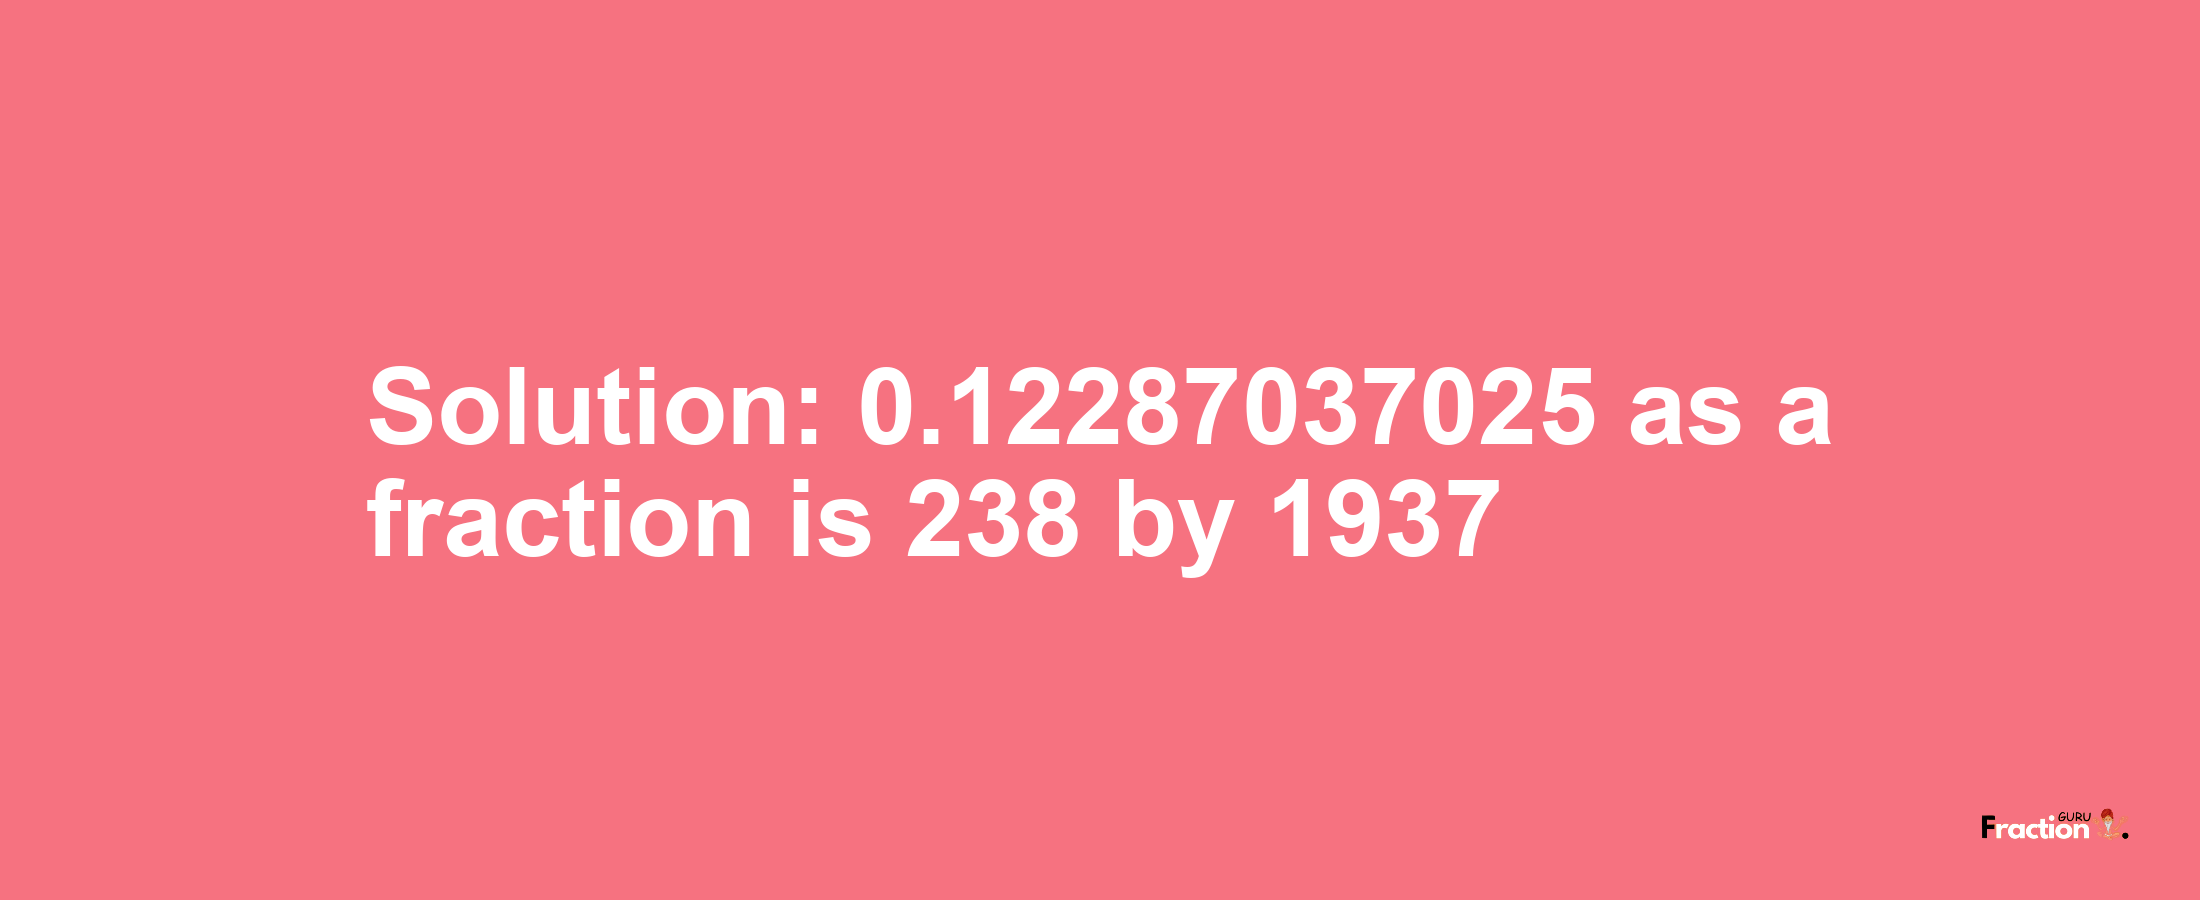 Solution:0.12287037025 as a fraction is 238/1937